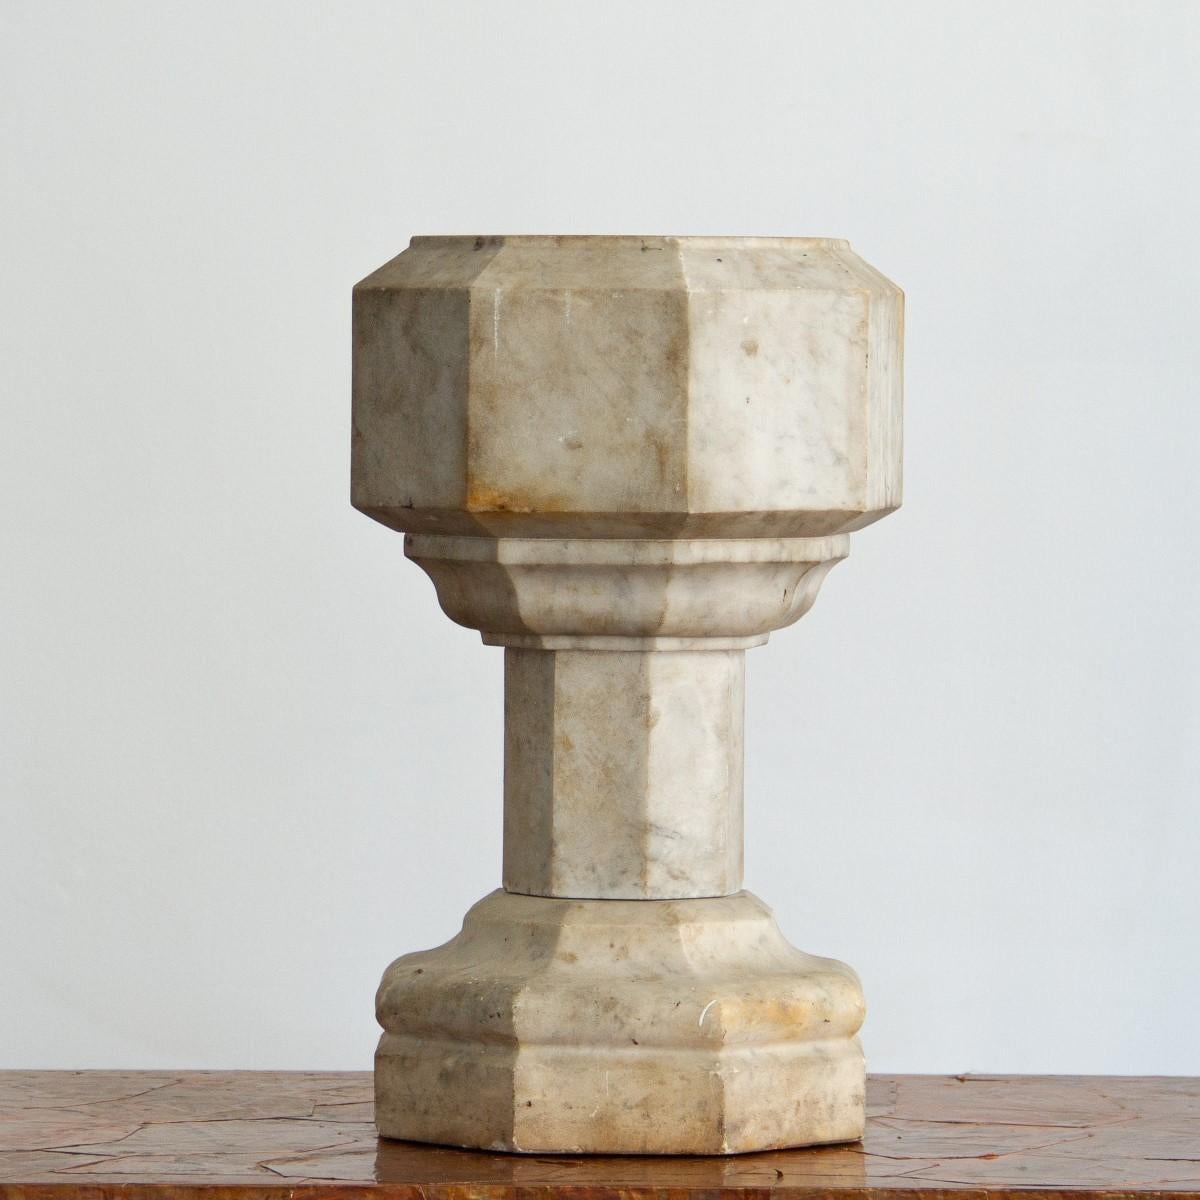 An English miniature baptismal, eight sided font in white mottled marble, circa 1860. 

In the 18th and 19th centuries, baptisms were ordered privately as status of High Society. These portable, miniature fonts would be commissioned and kept in